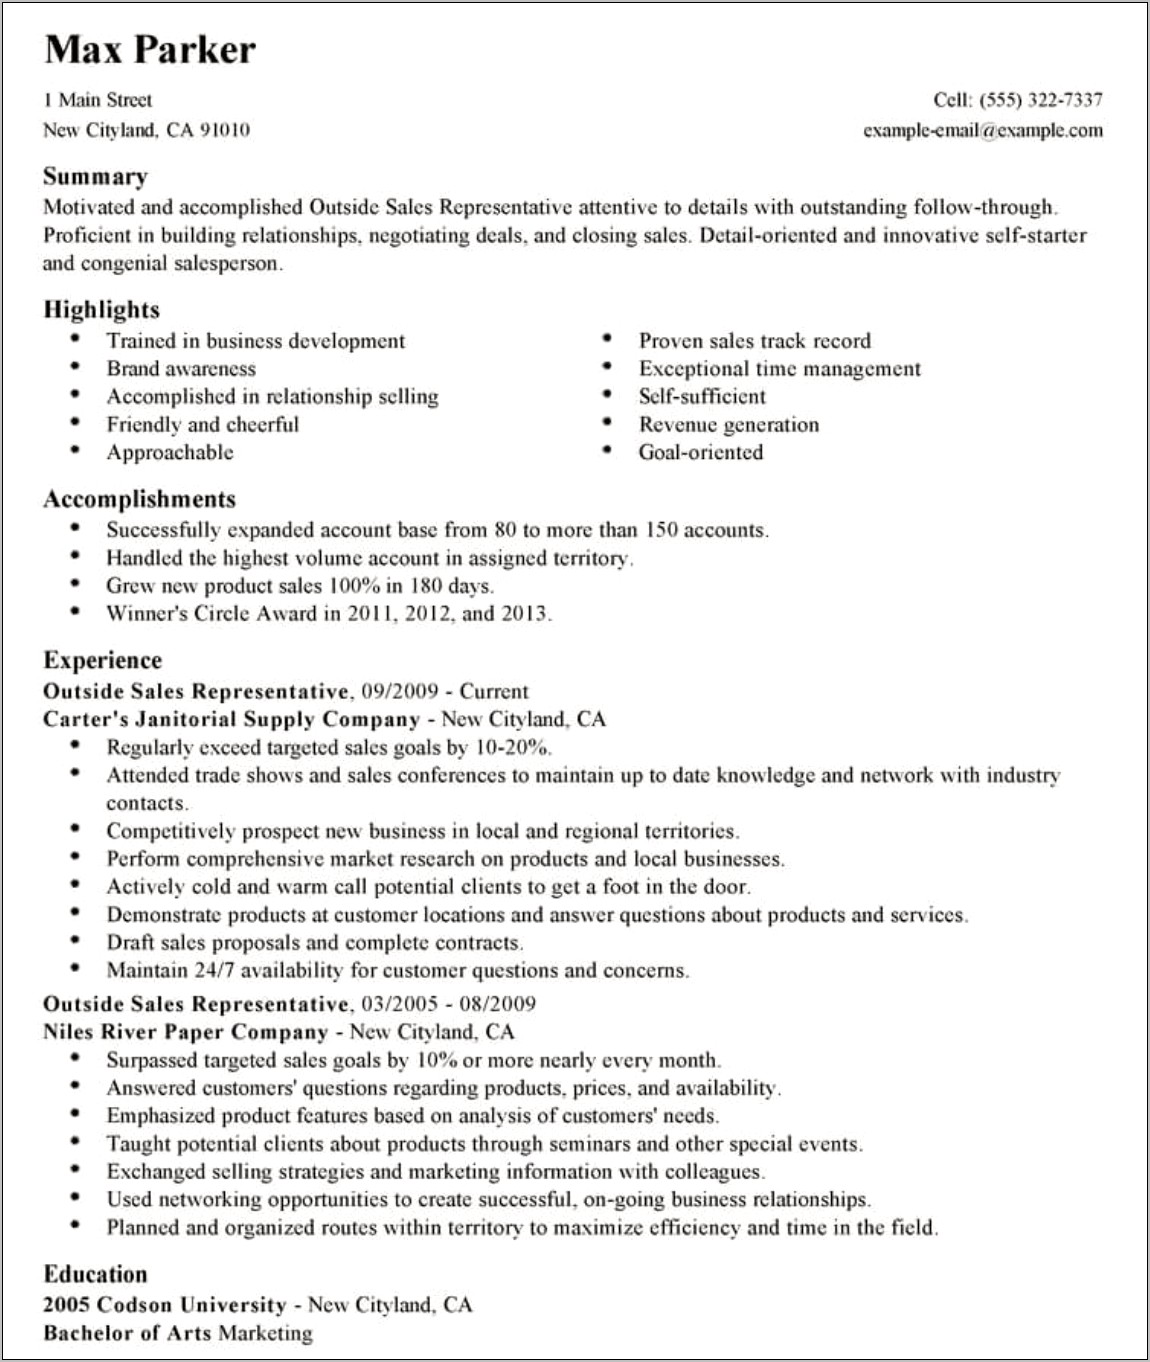 Sample Resume For Sales Manager In Fmcg